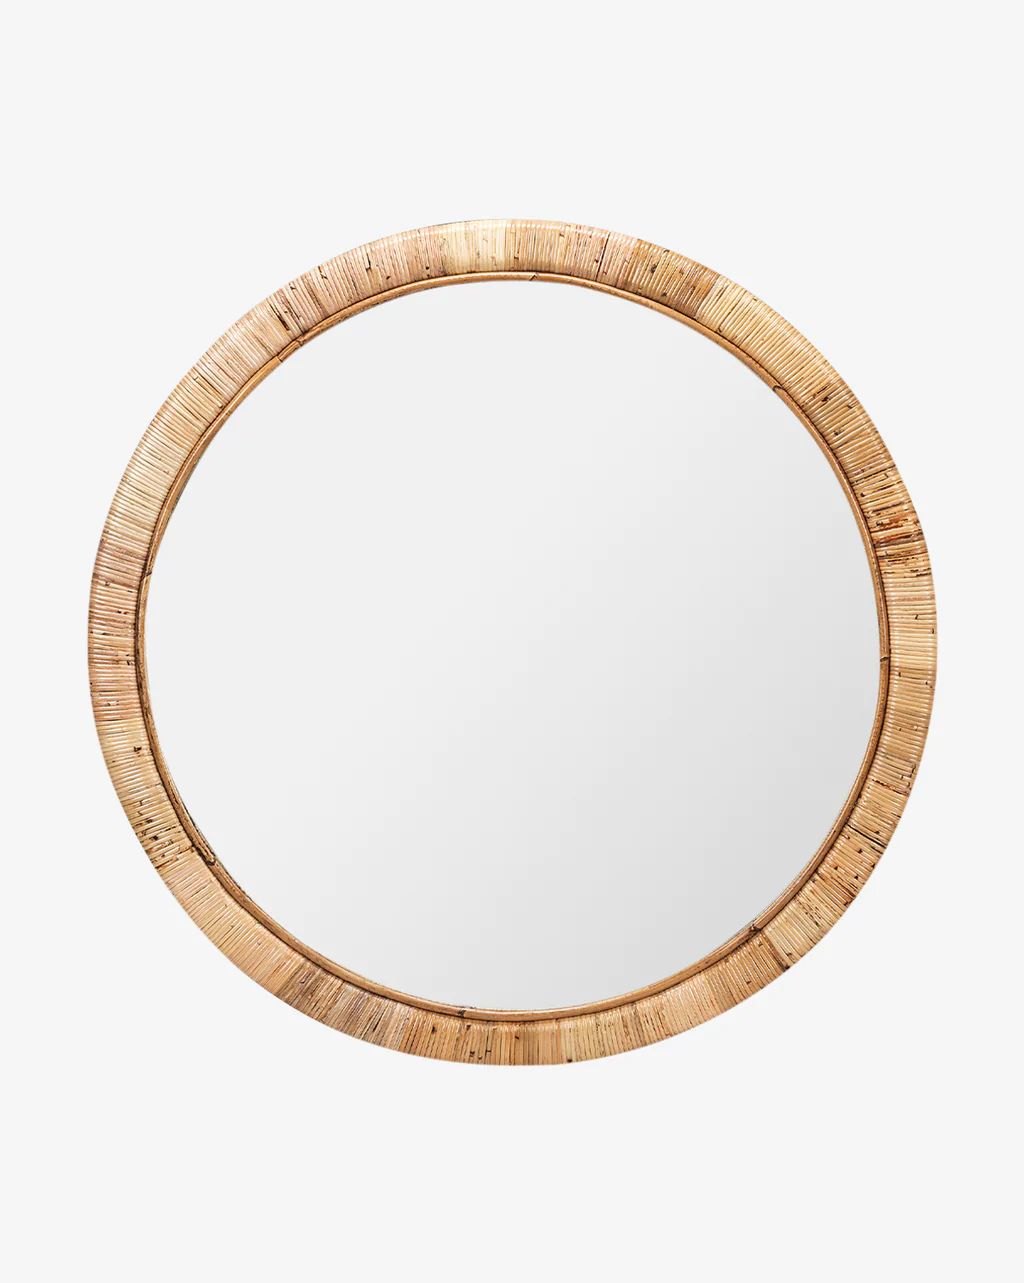 Lenore Wall Mirror | McGee & Co.